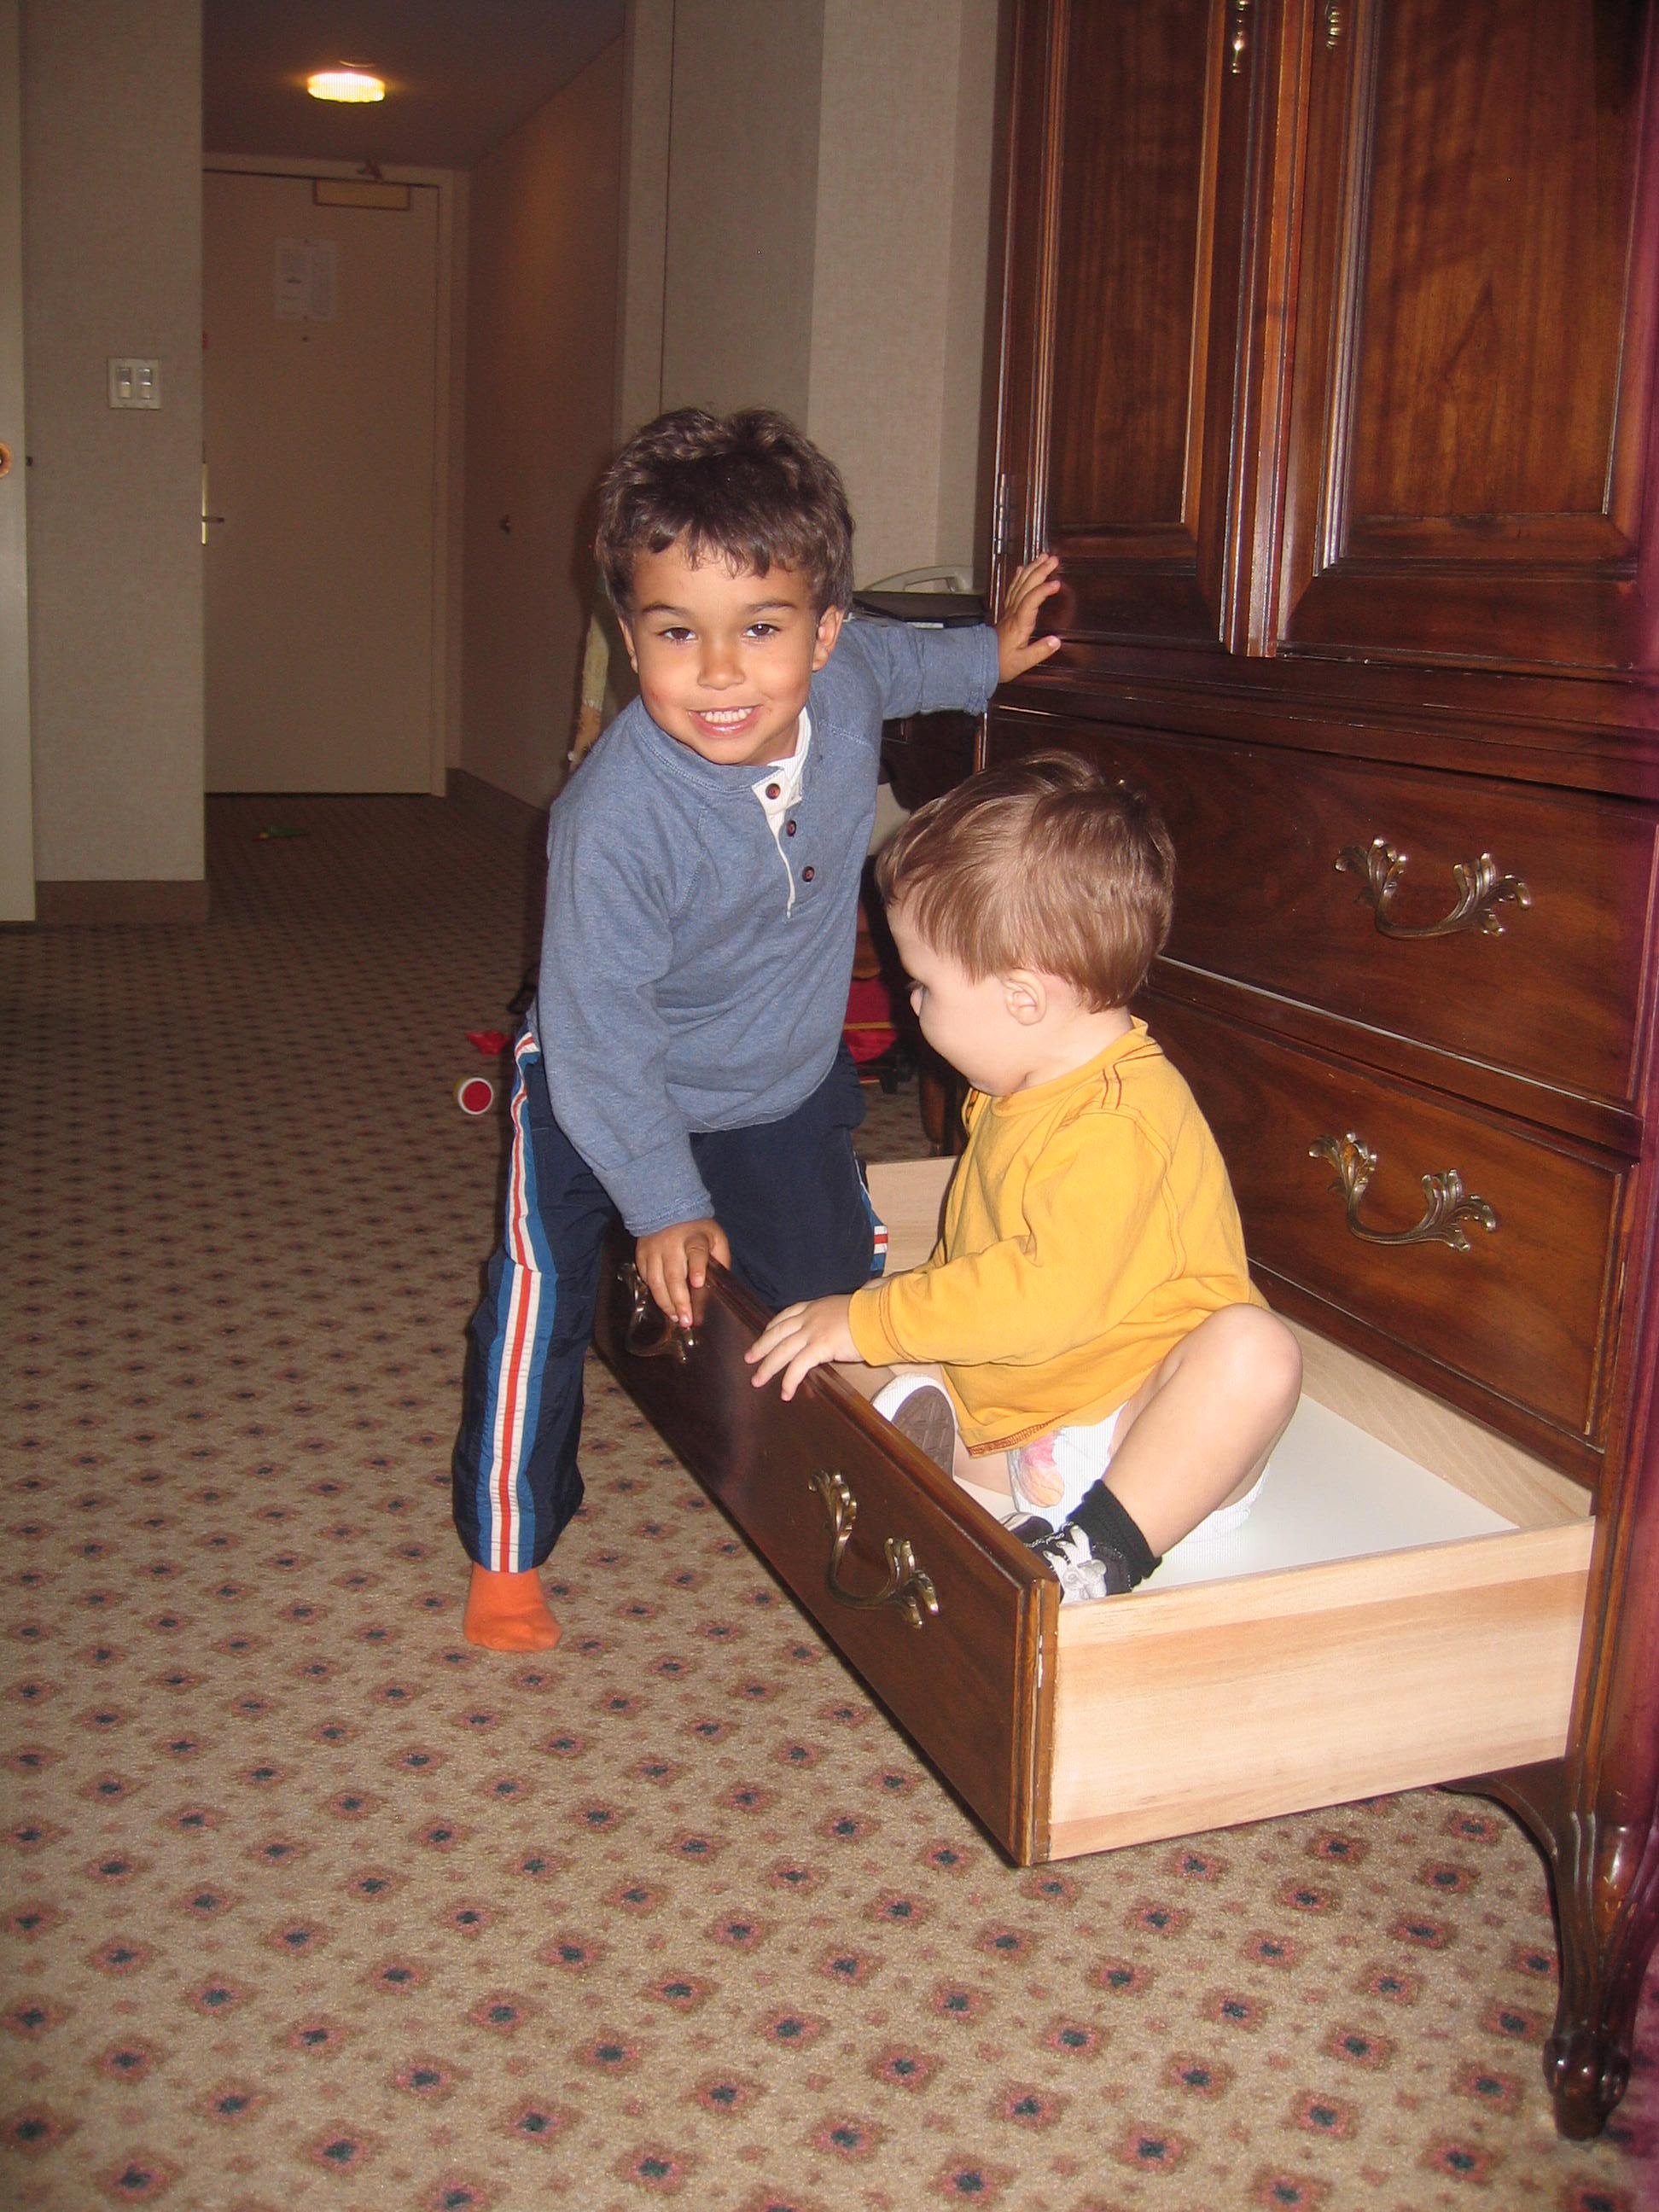 Nate & Zeke try out their bed...I'm kidding! Only Zeke could fit in that drawer.